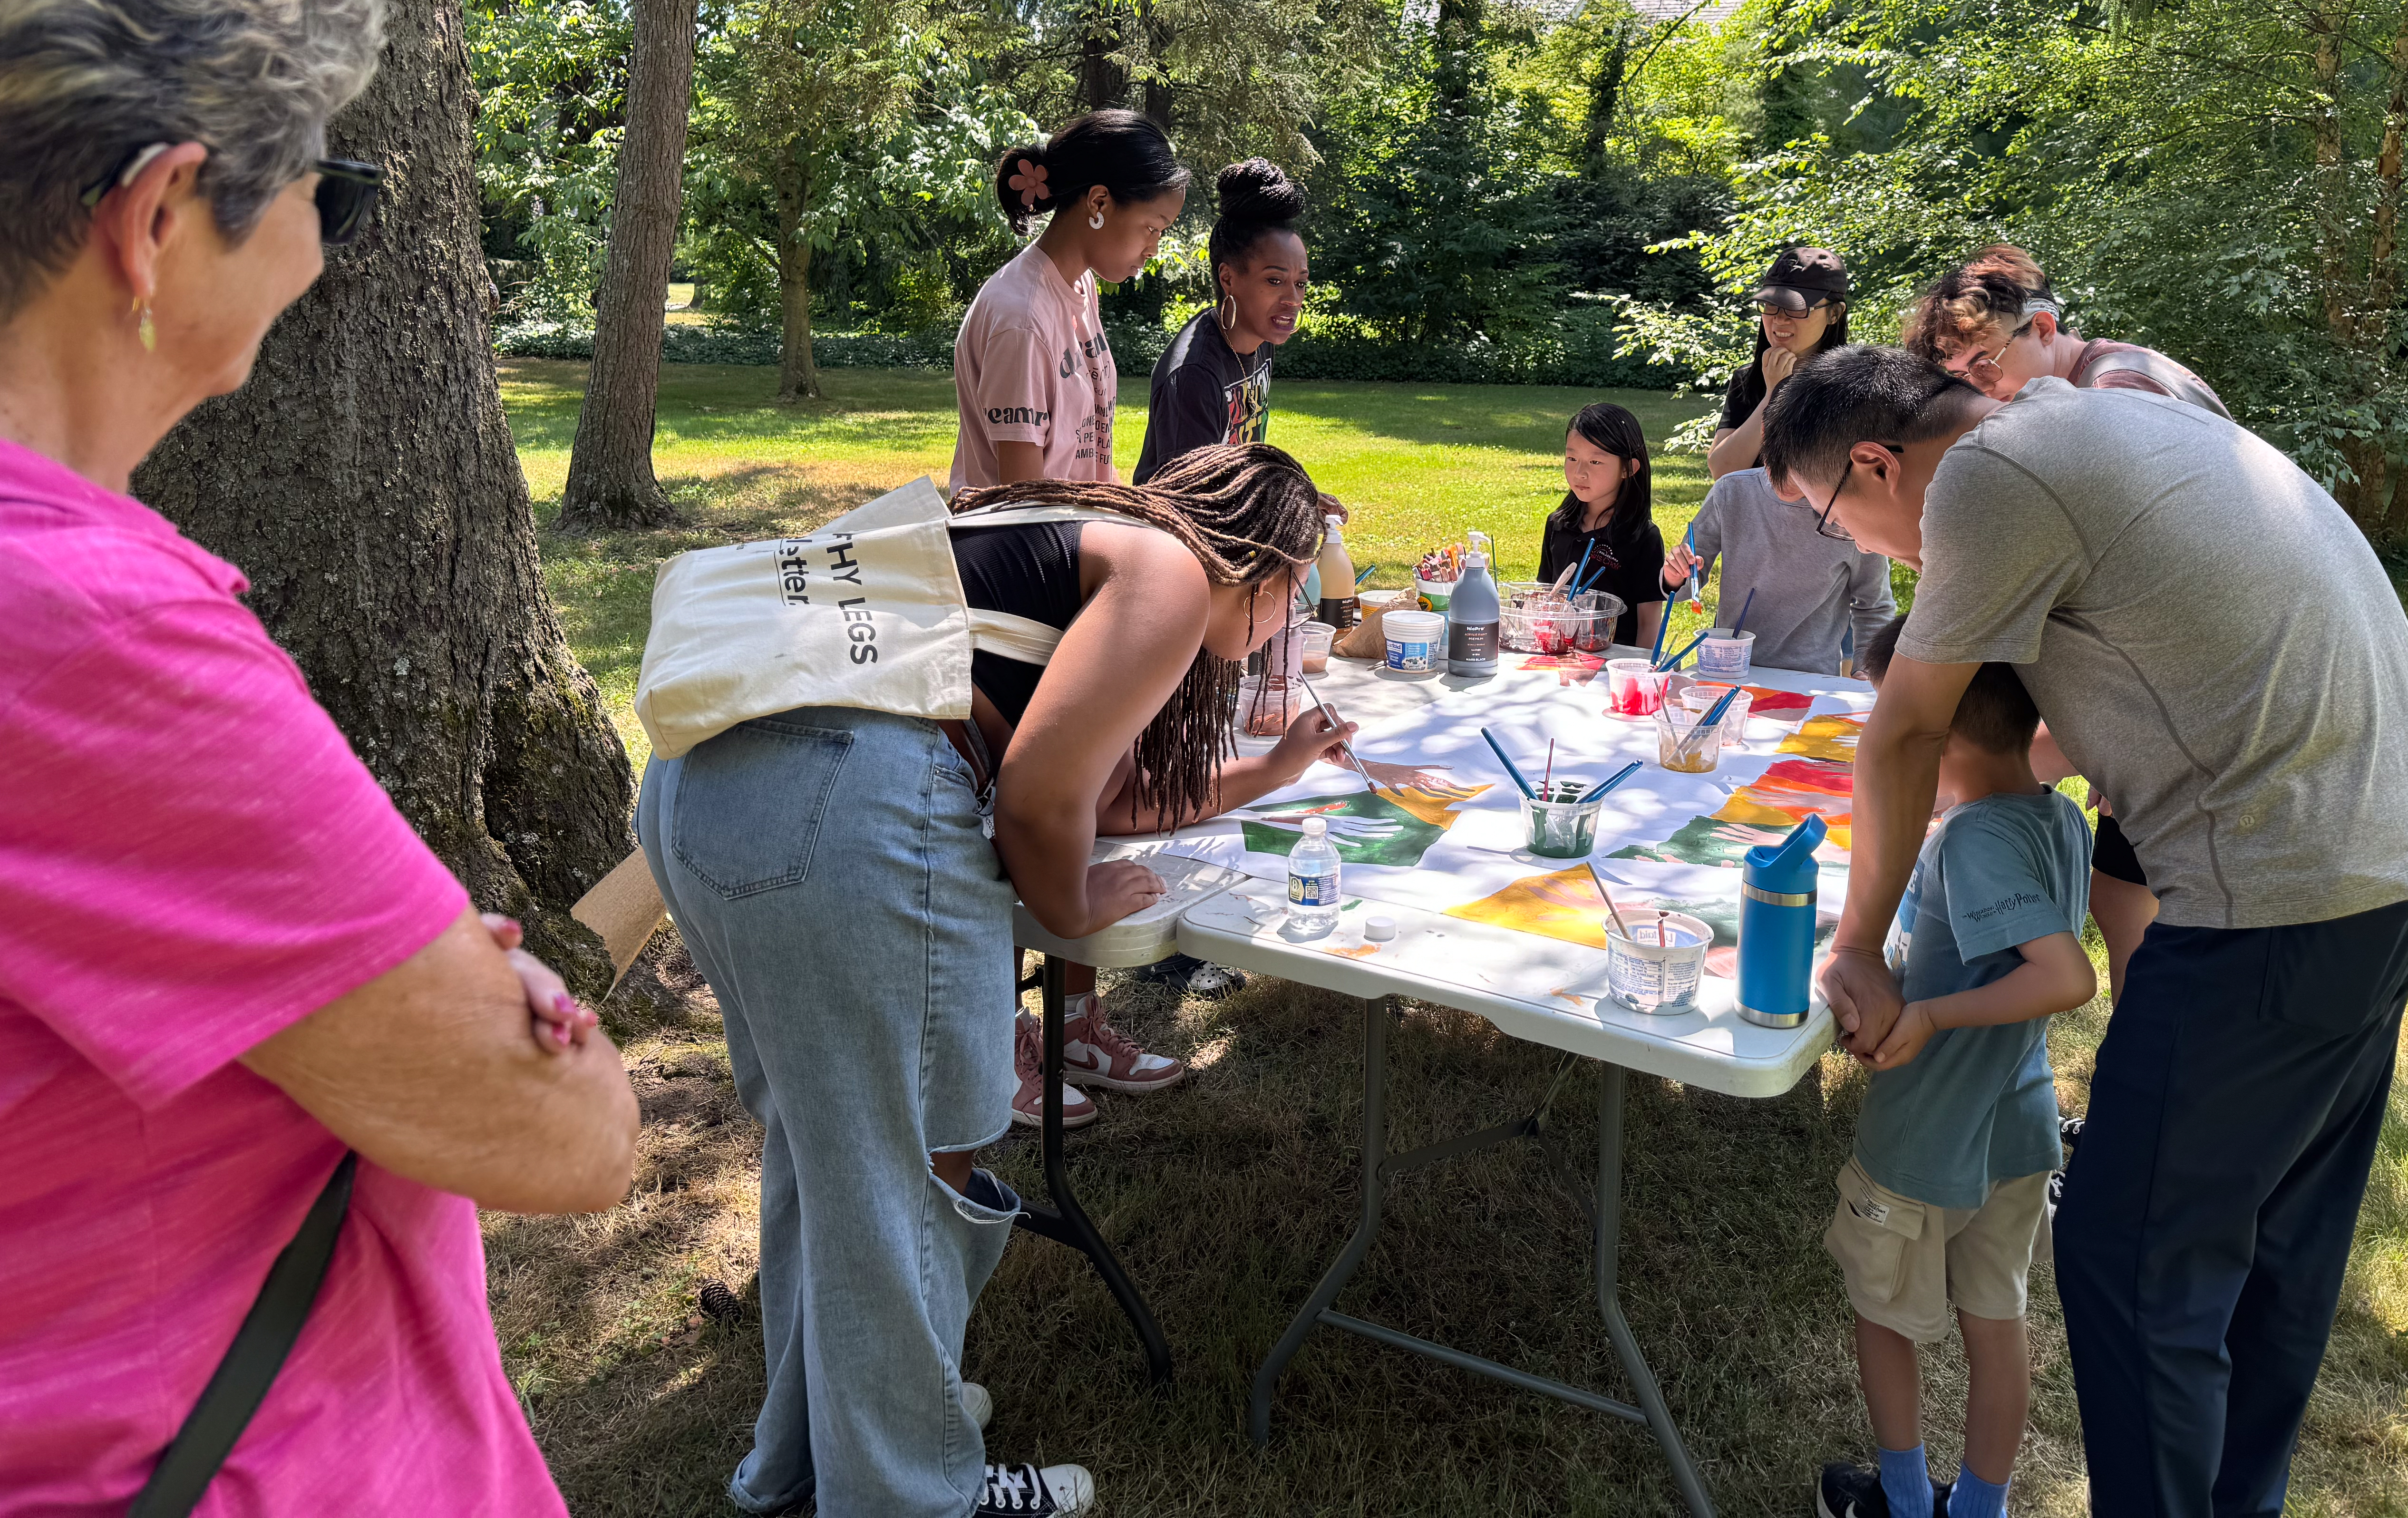 Community art project led by Jazlyne Sabreen at Juneteenth Freedom Day